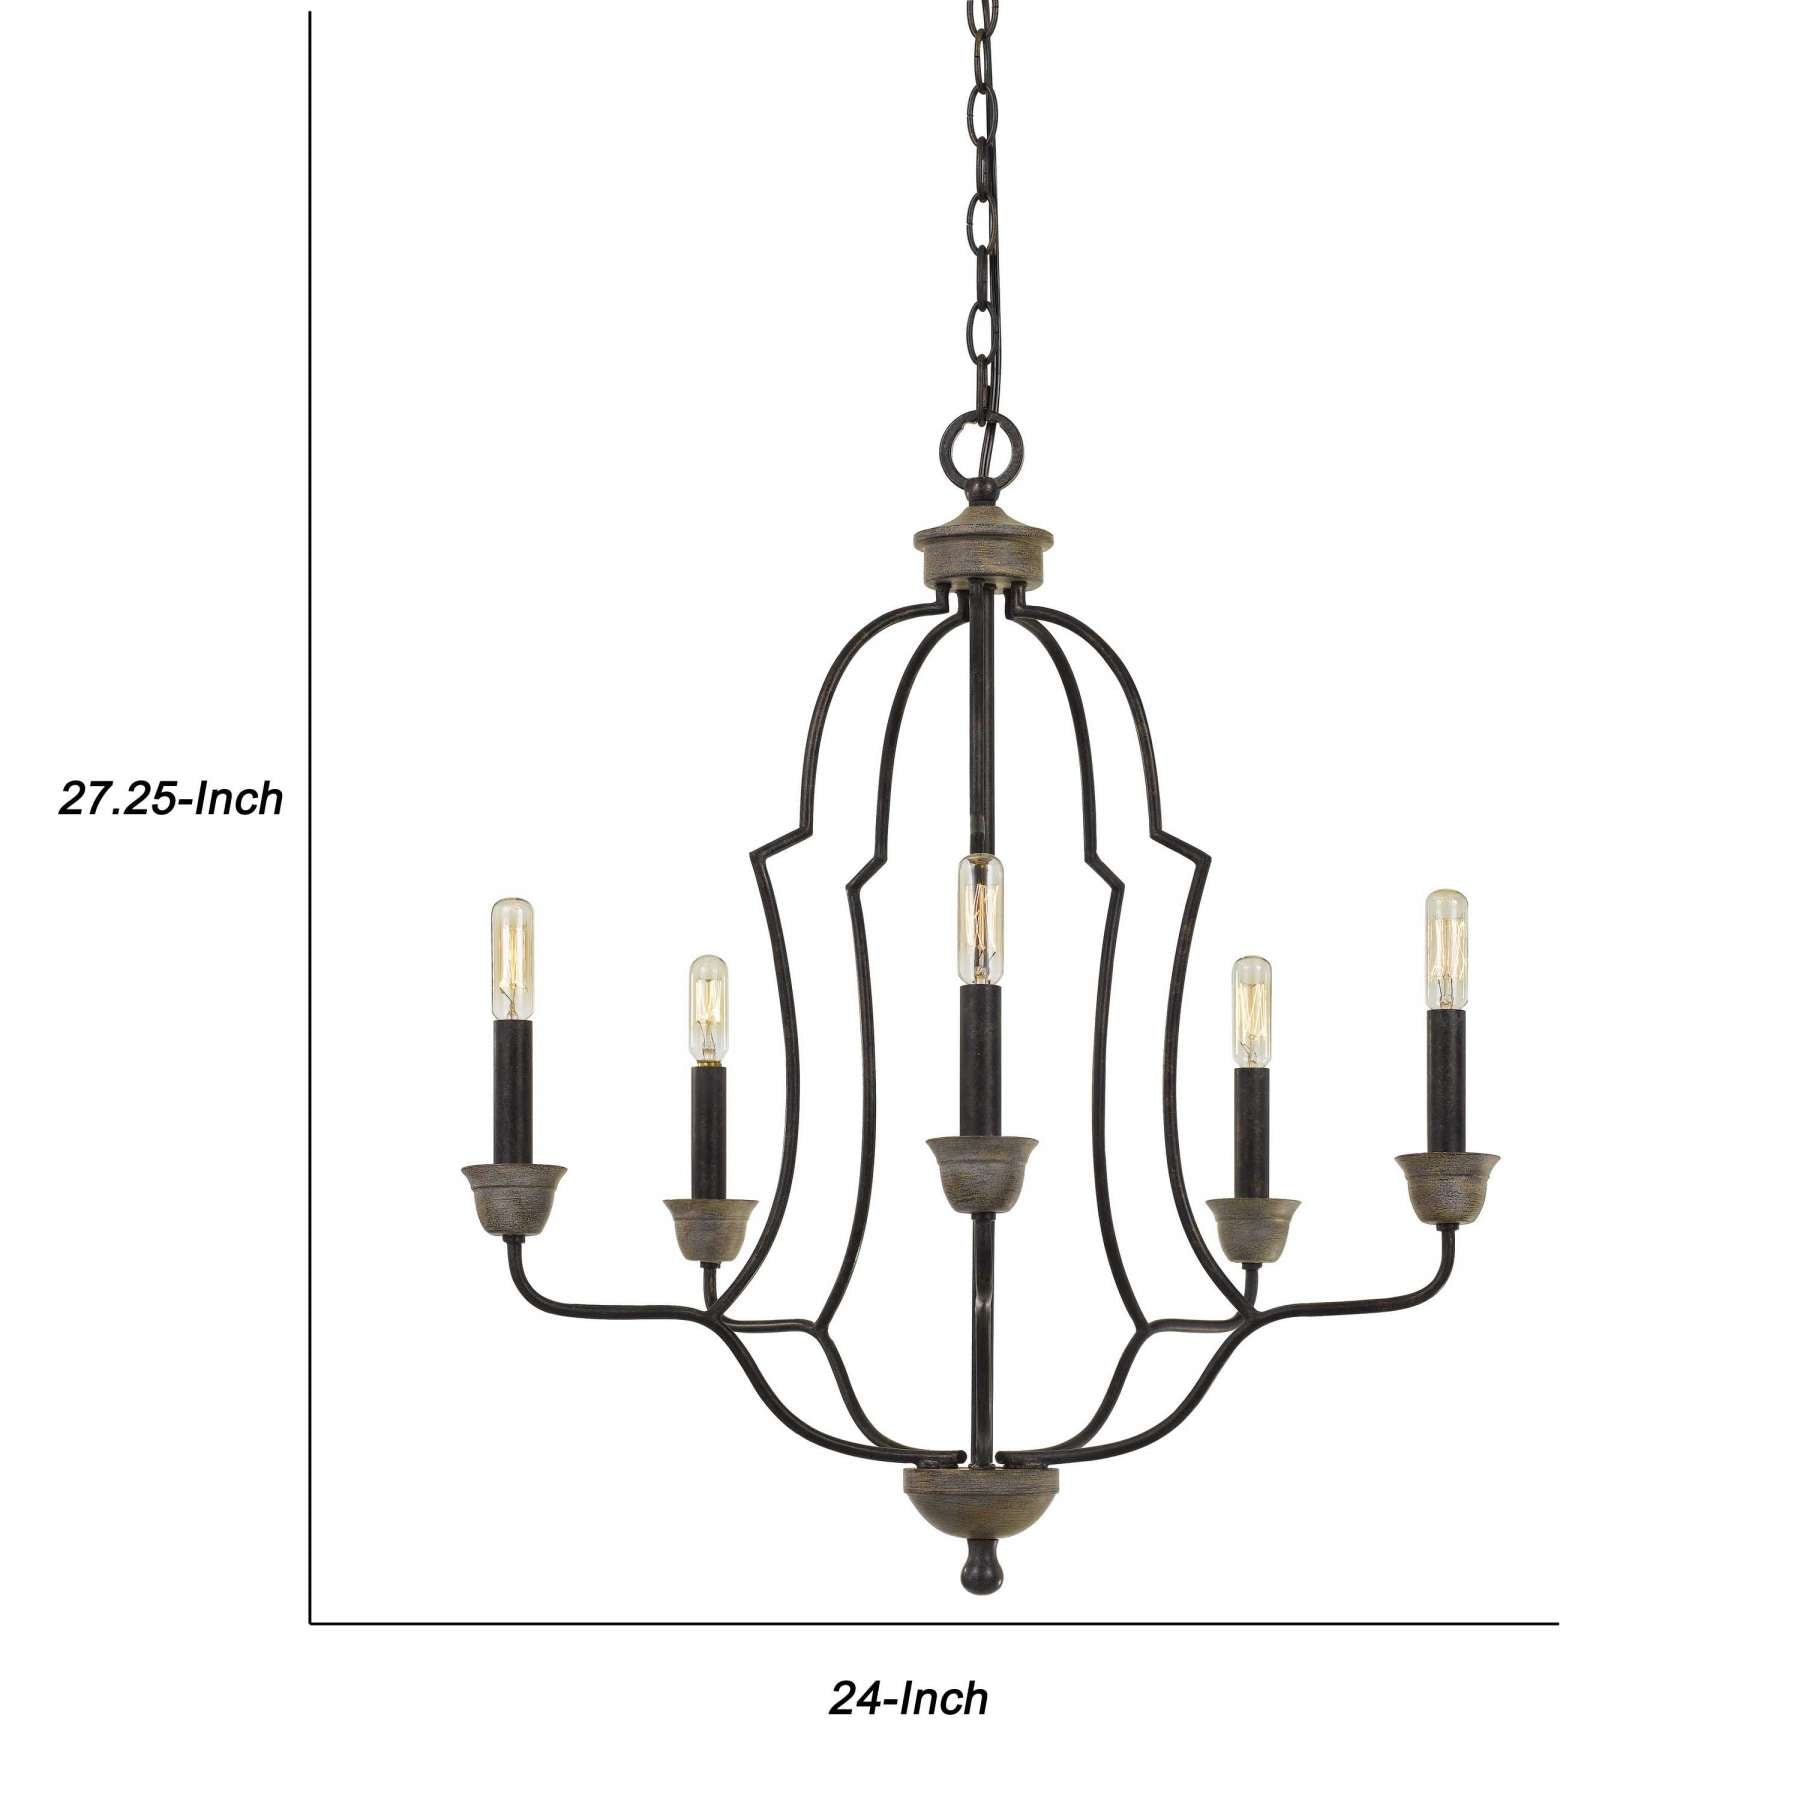 Sculpted Metal Frame Chandelier With Base Sockets, Black By Benzara